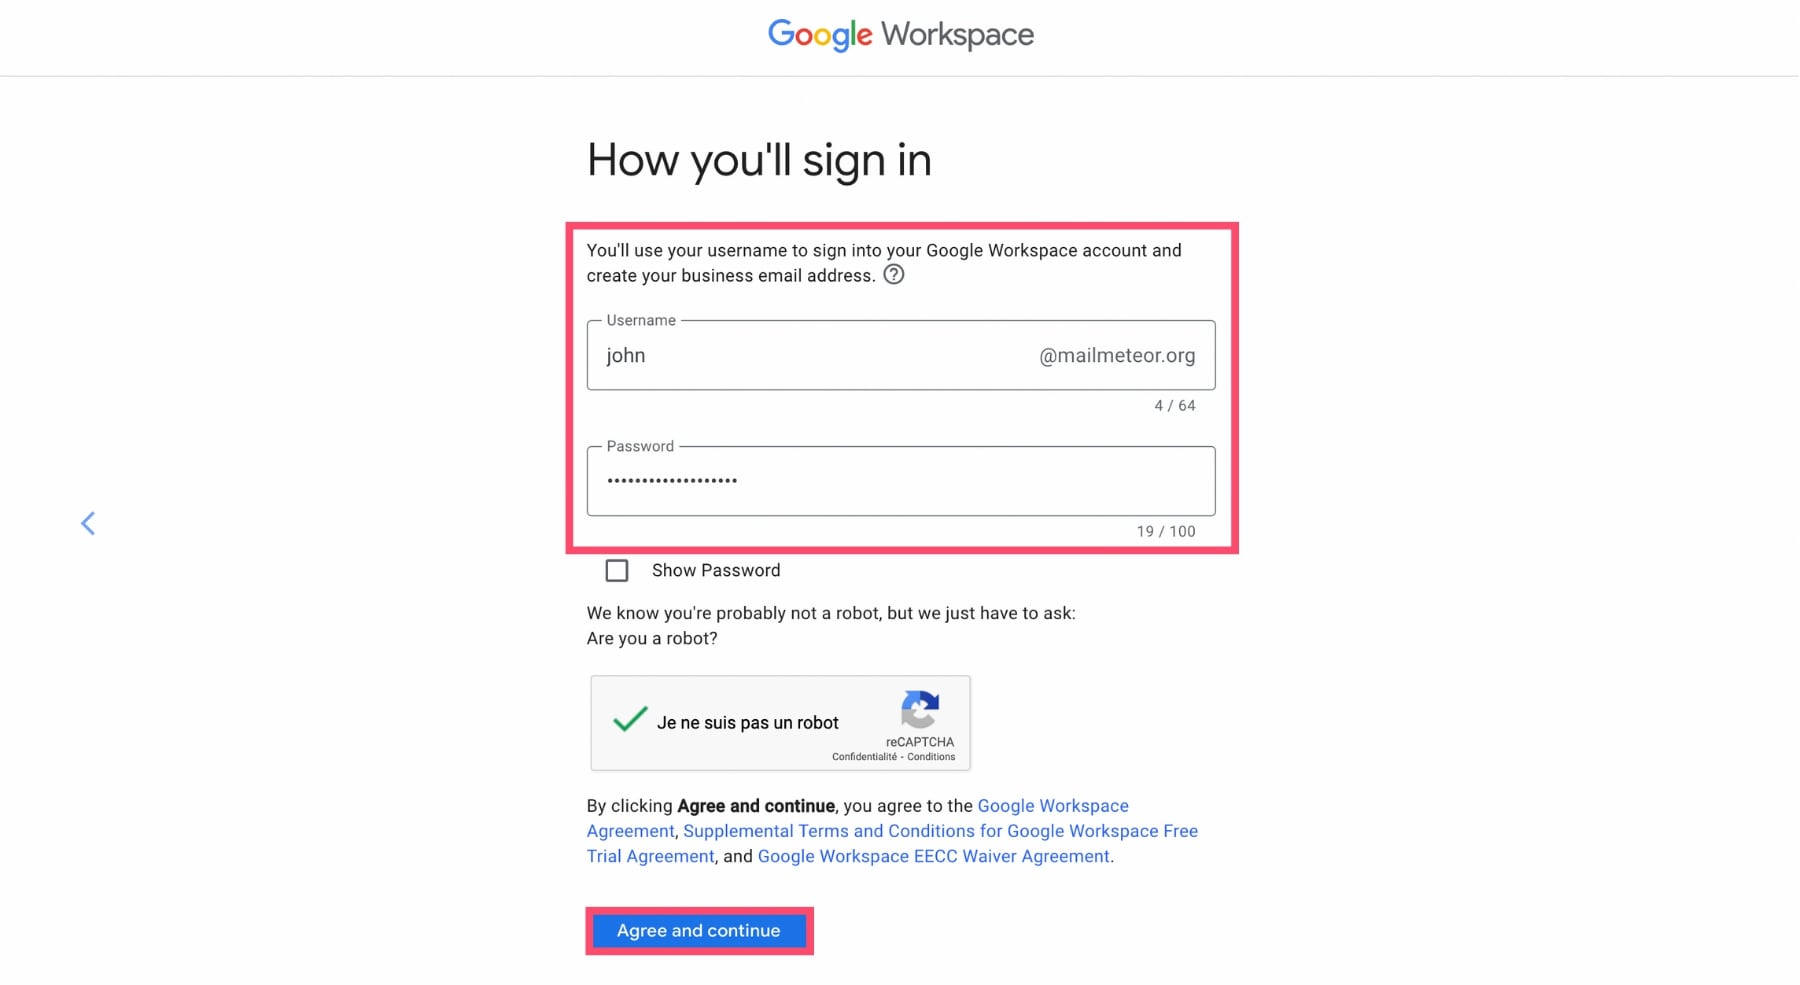 Pick your Google Workspace username and password